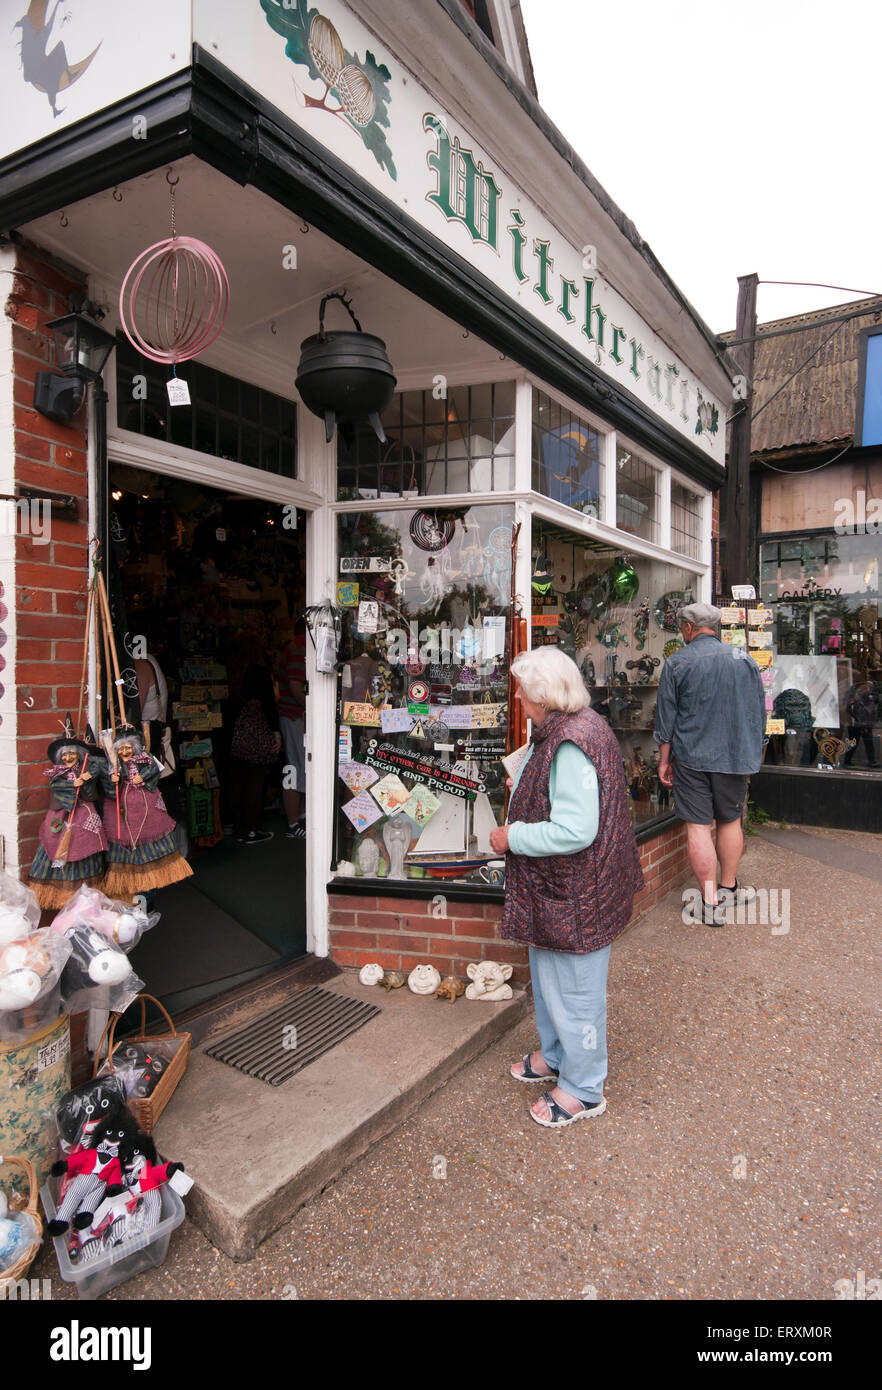 Exterior Of A Witchcraft Shop In Burley The New Forest Hampshire UK Stock Photo